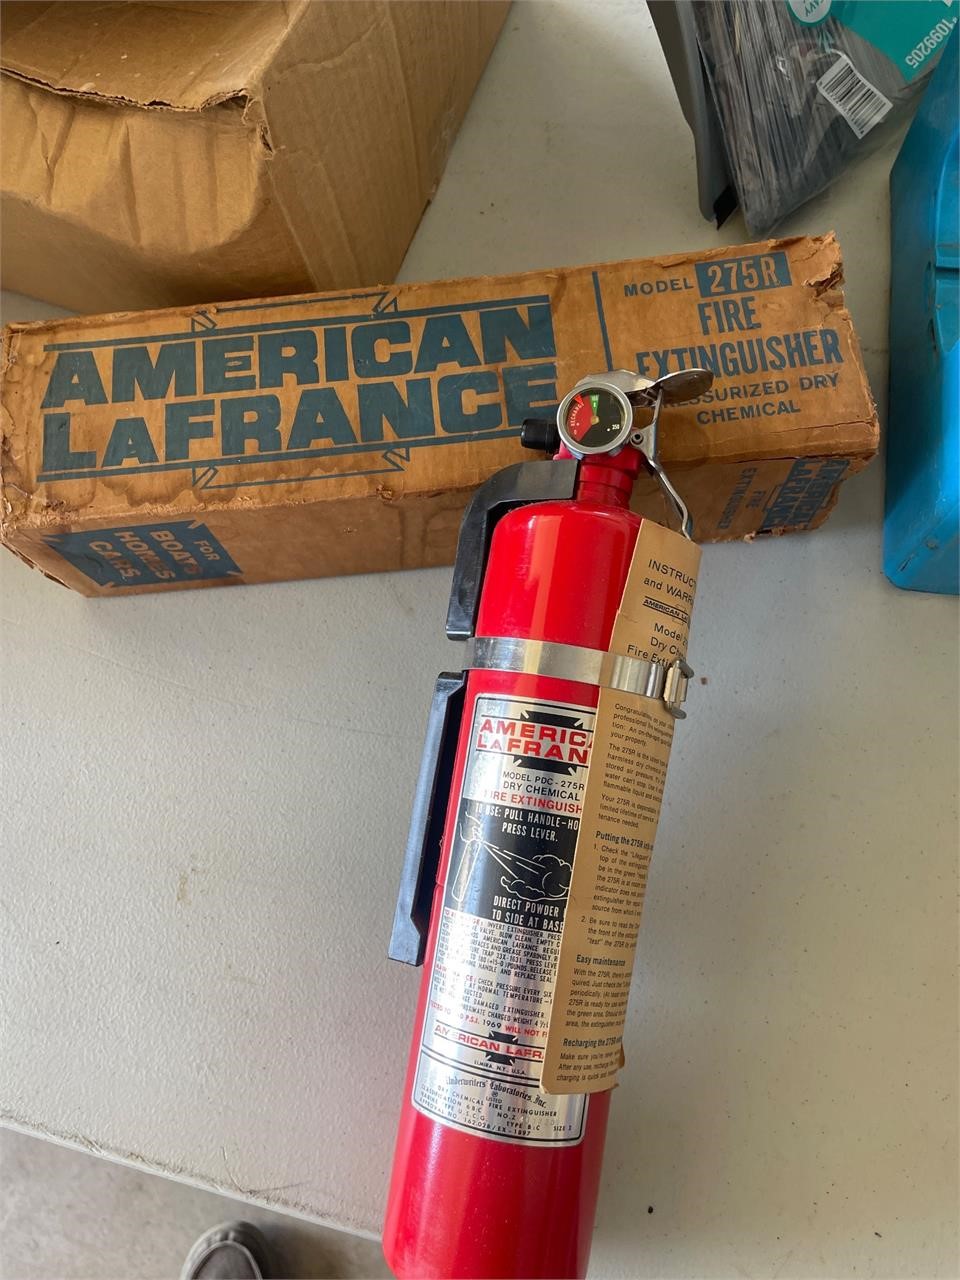 American Lafrance Fire Extinguisher with Box